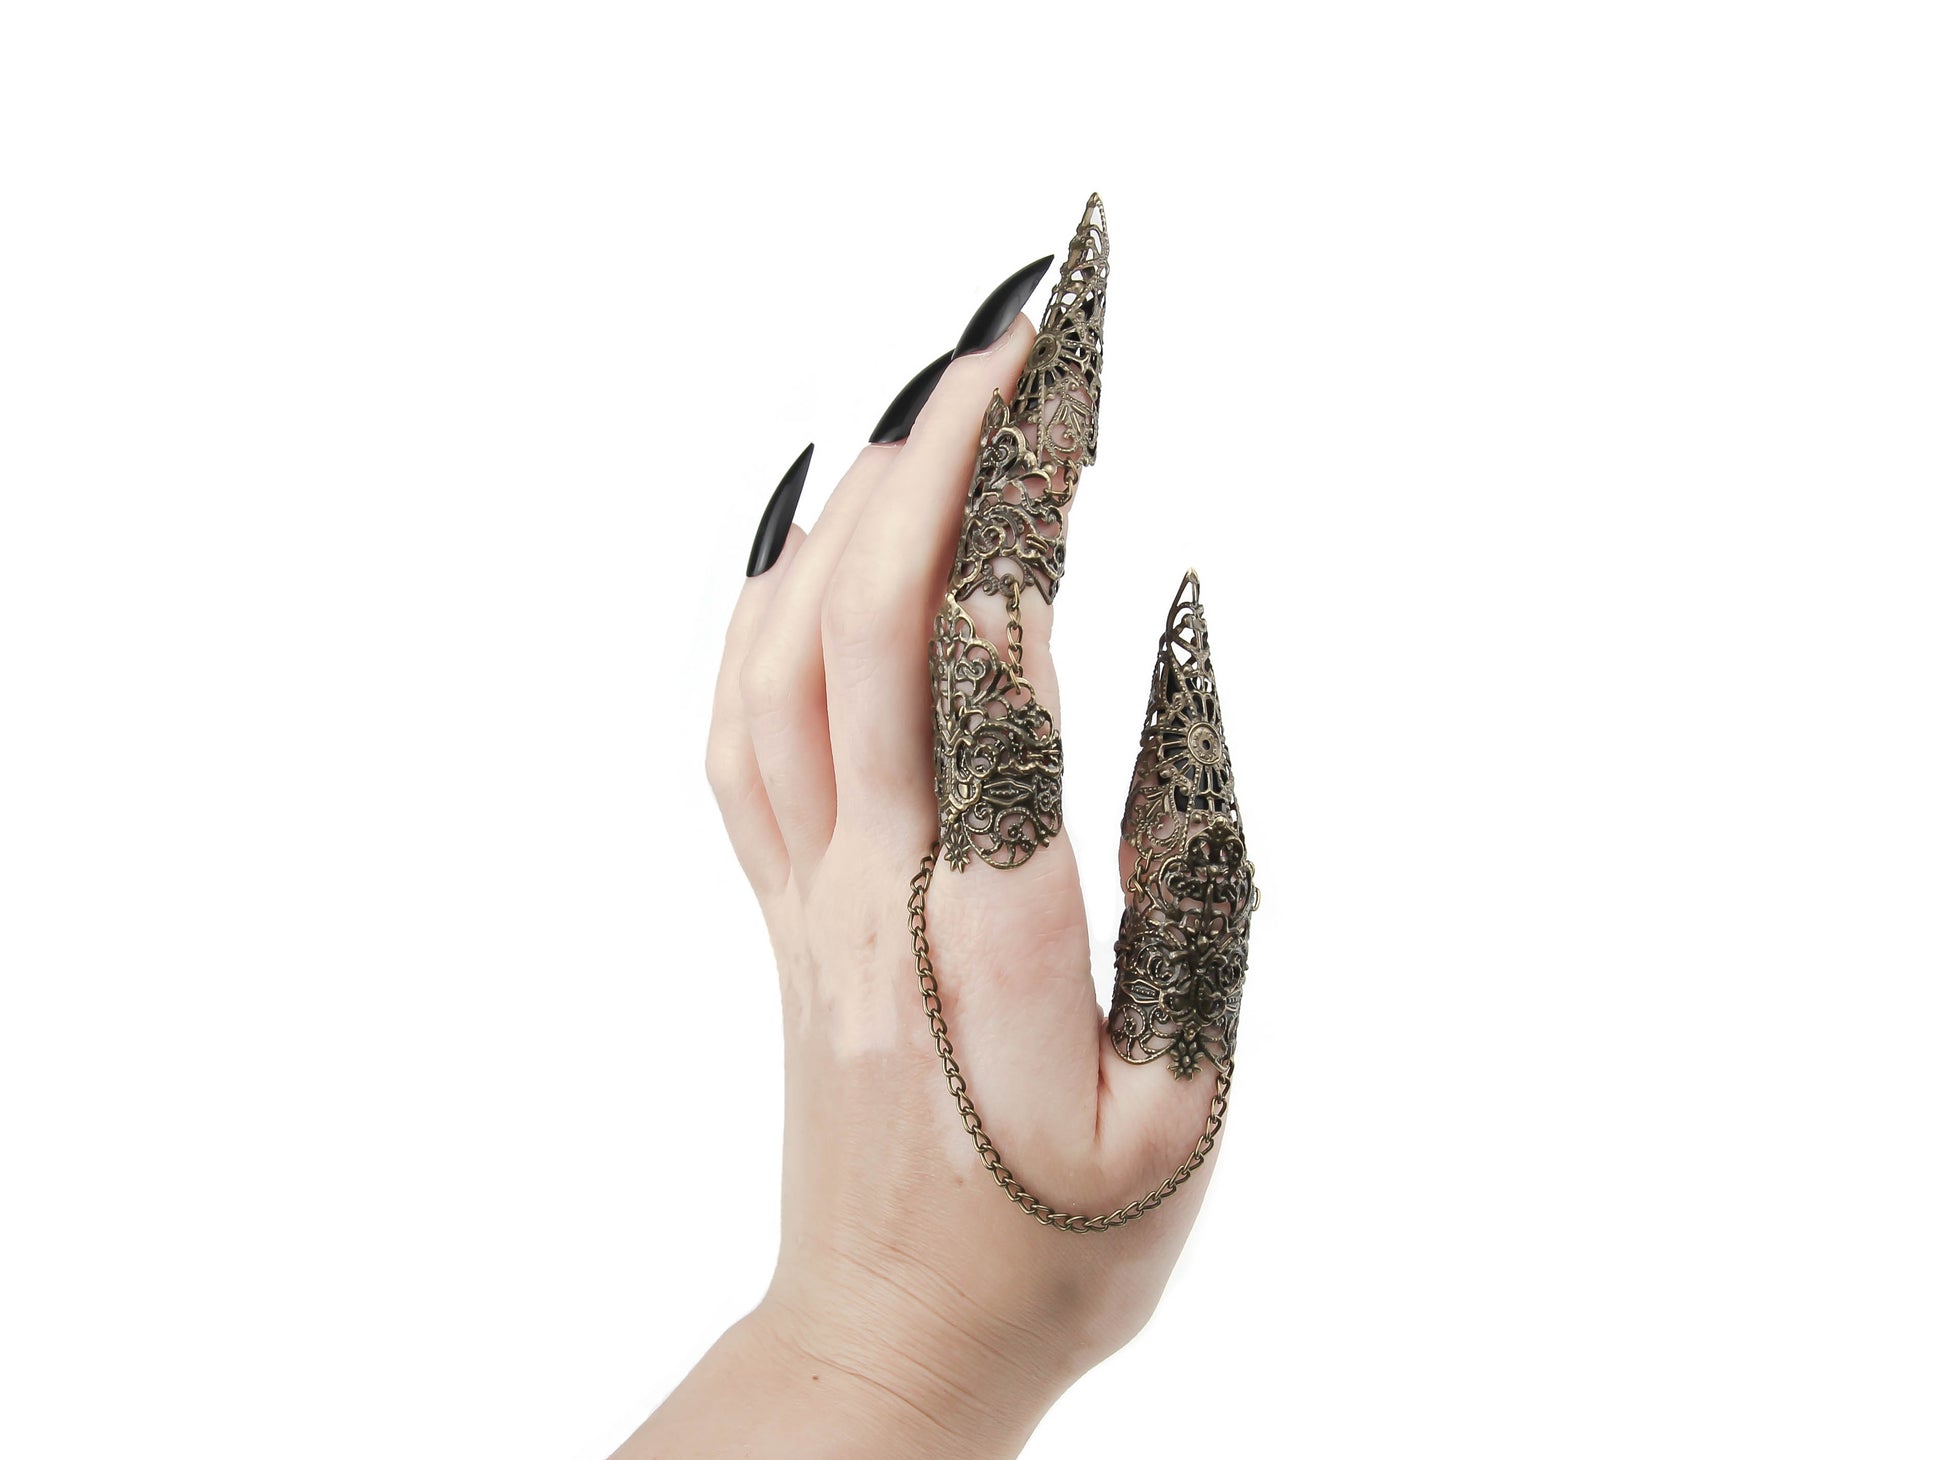 A hand is adorned with an intricate Myril Jewels gothic full finger double ring, extending into elegant claws over the fingertips. The claw ring's elaborate bronze filigree design embodies the essence of neo-gothic jewelry, perfect for those who seek a dark, avant-garde accessory. This piece is a statement in the world of gothic-chic and whimsigoth style, ideal for Halloween, everyday wear, or as a distinctive addition to rave party and festival outfits